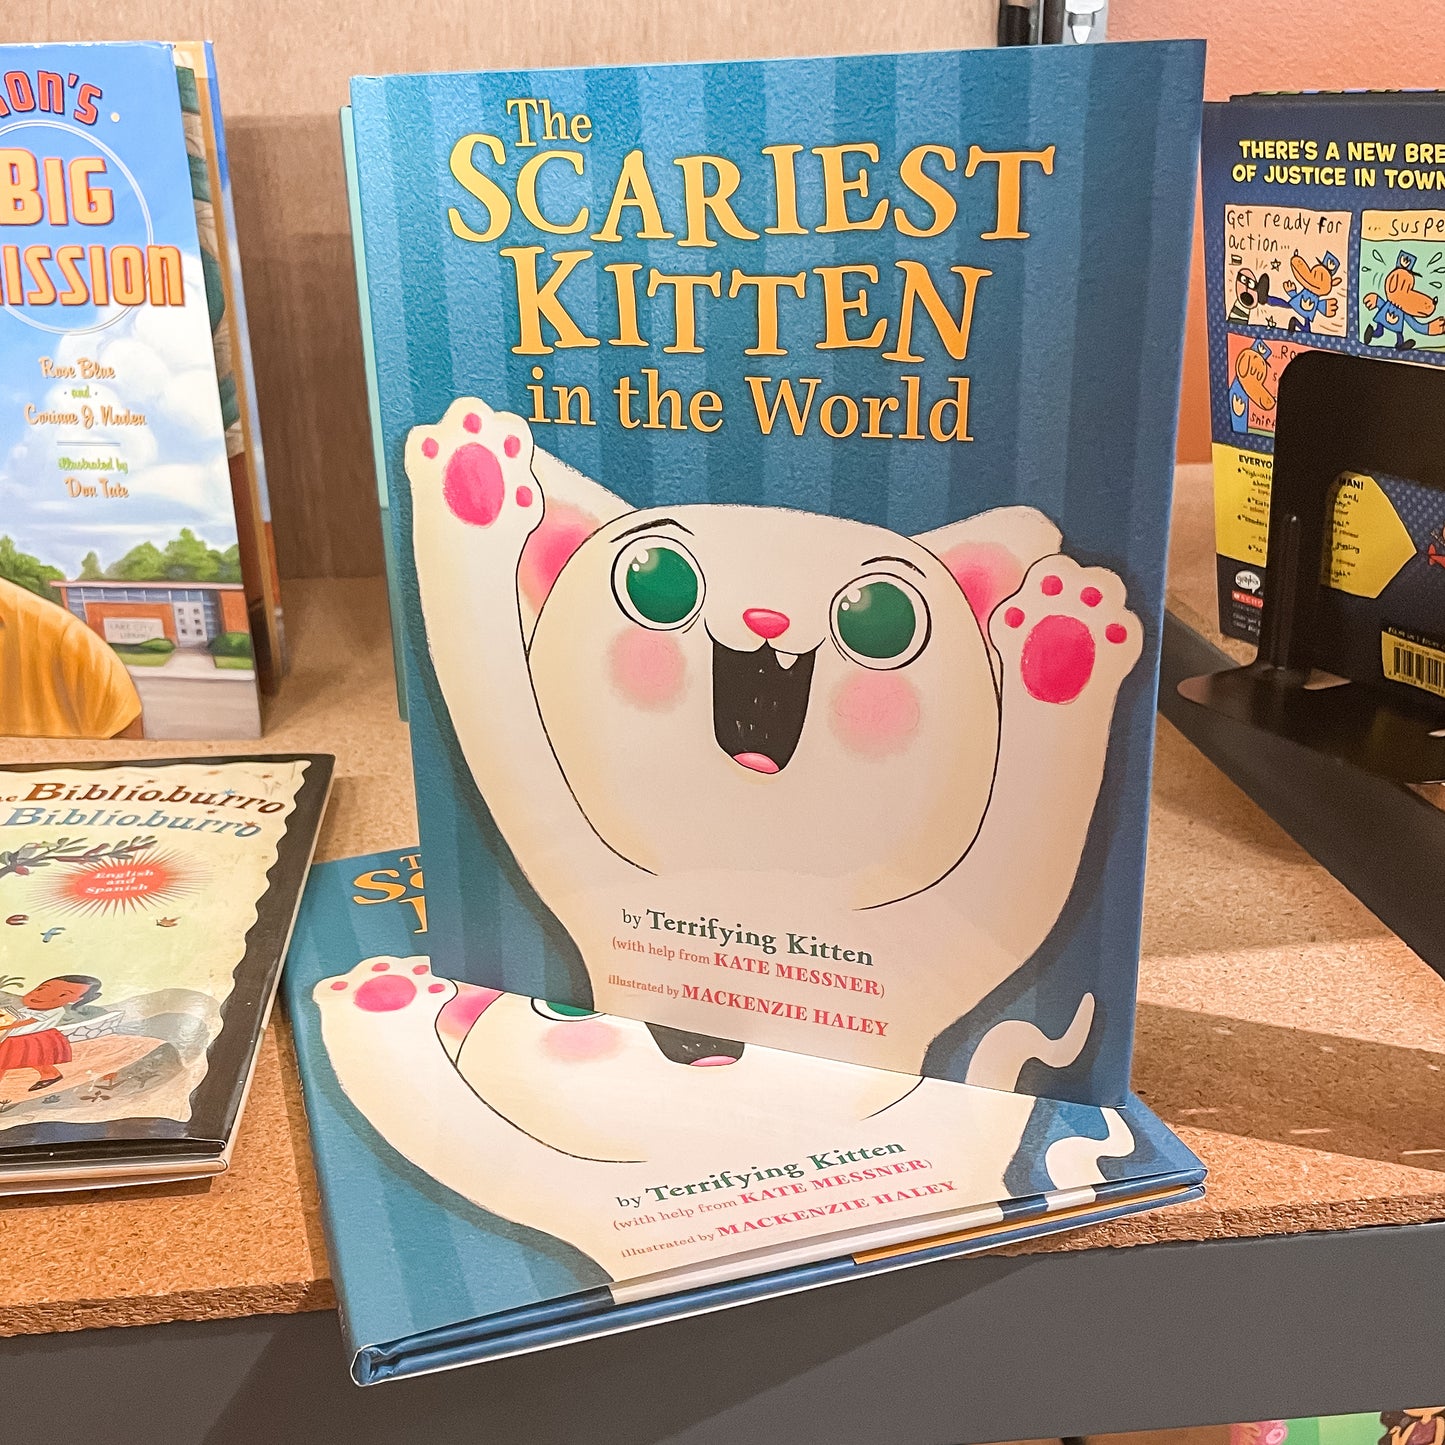 The Scariest Kitten in the World by Kate Messner